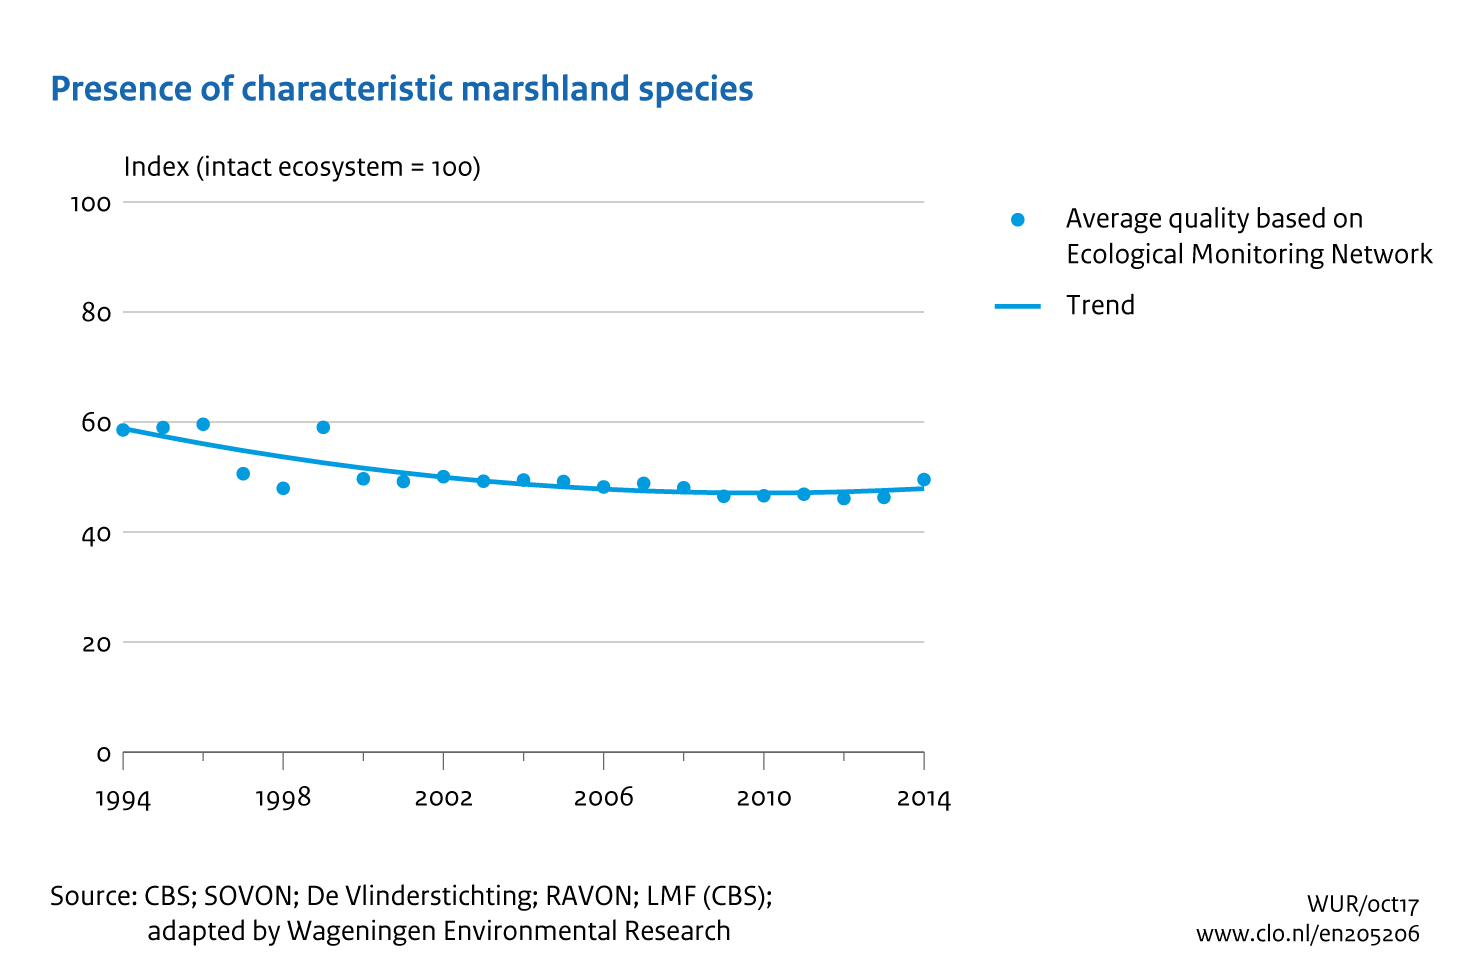 Image Presence of characteristic marshland species. The image is further explained in the text.